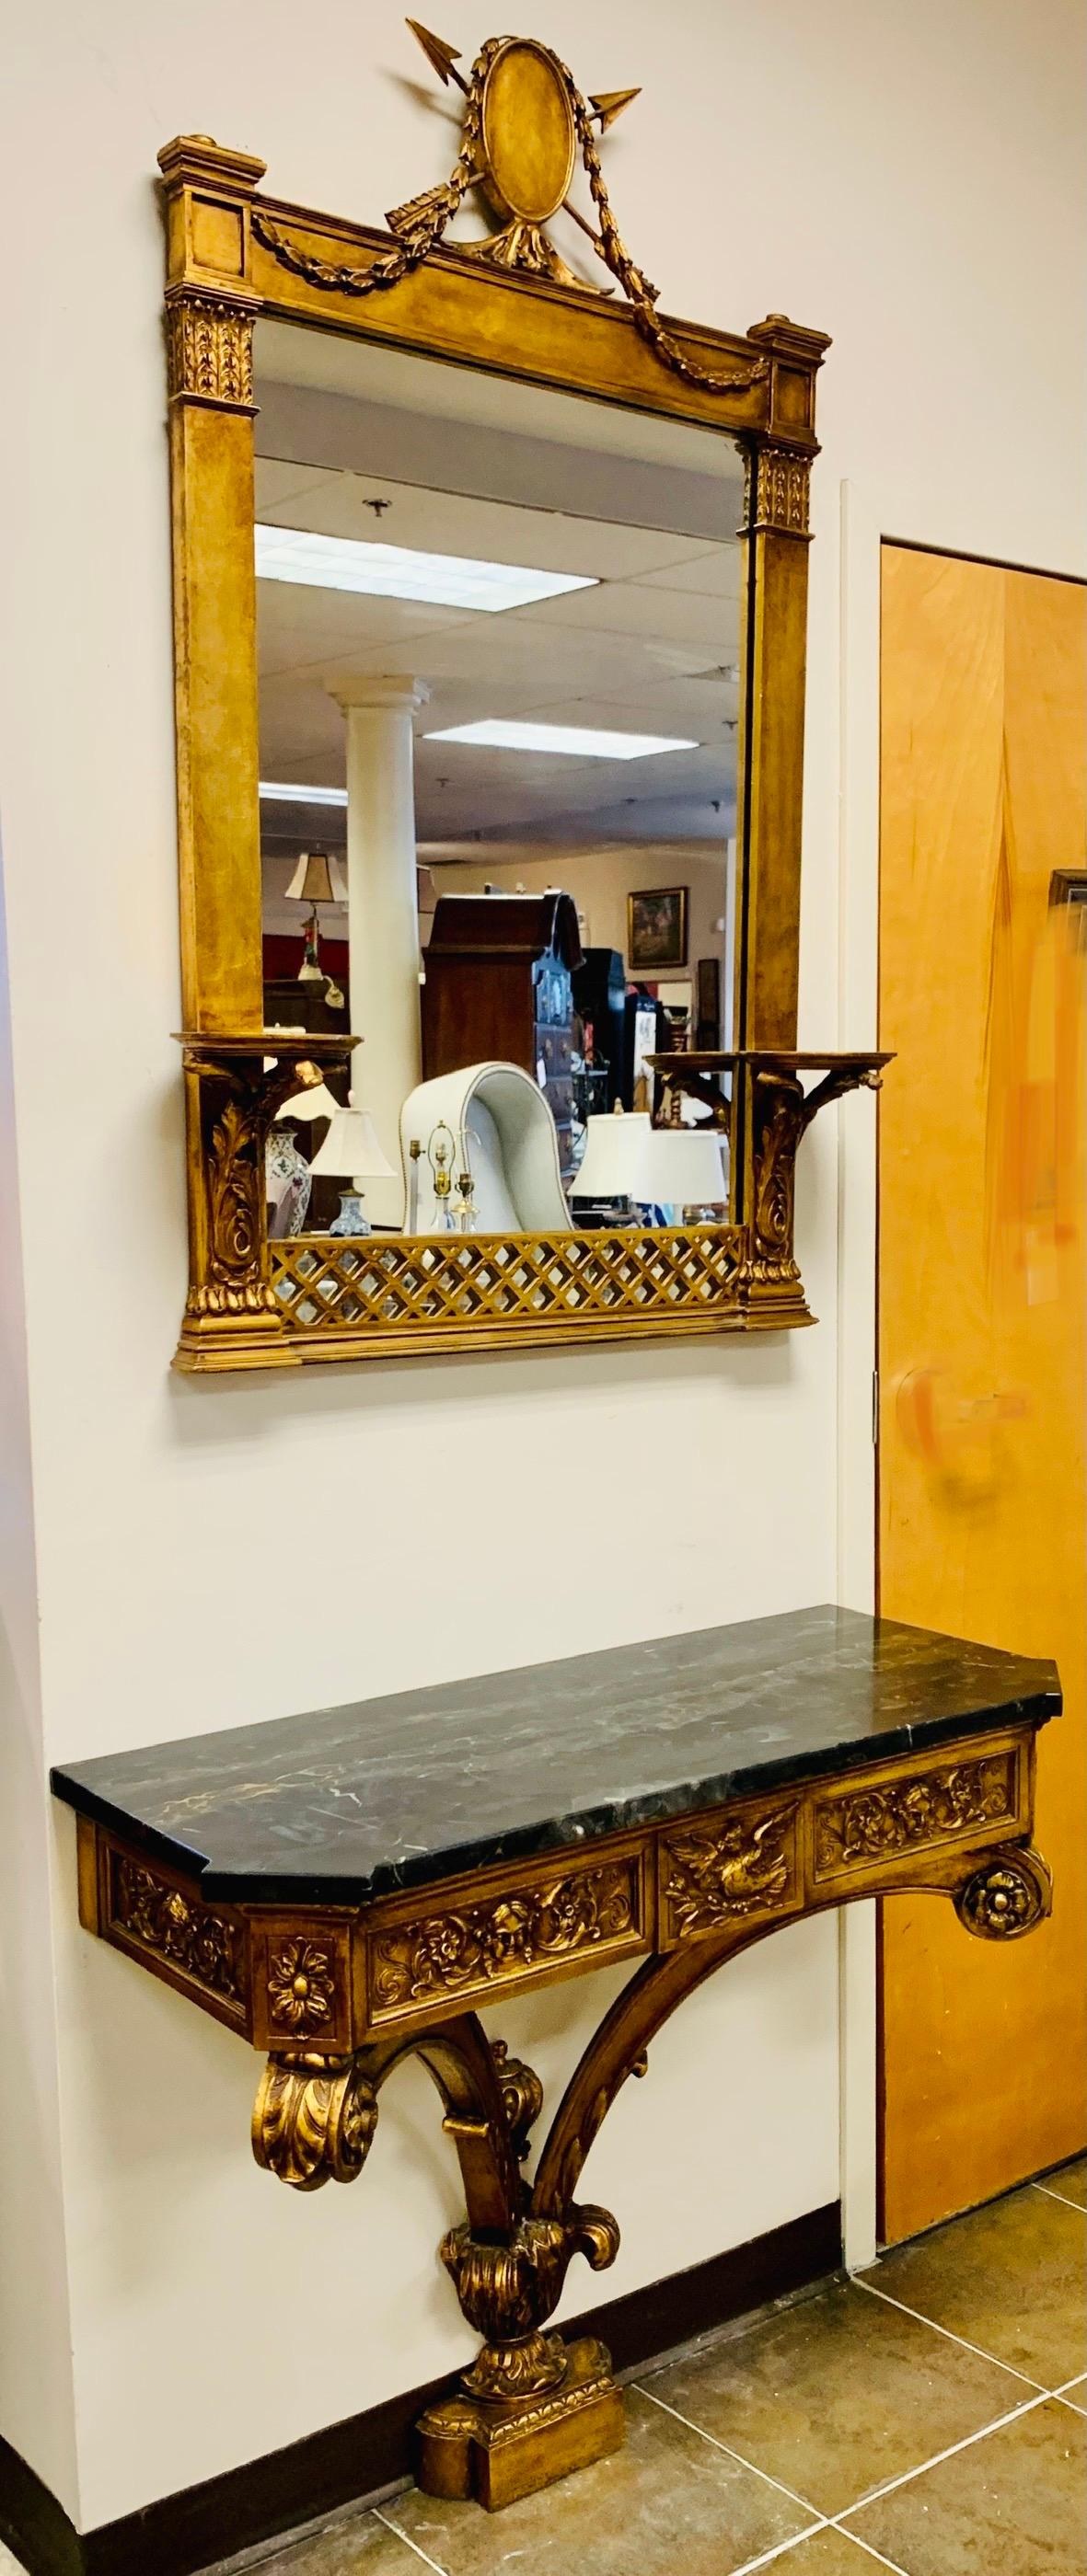 Antique 19th century ornate 2 pc carved gold giltwood console table with intricately carved motif of birds and faces. It has a thick marble top and attaches to the wall. The mirror features attached wall brackets on each side and a crest with an